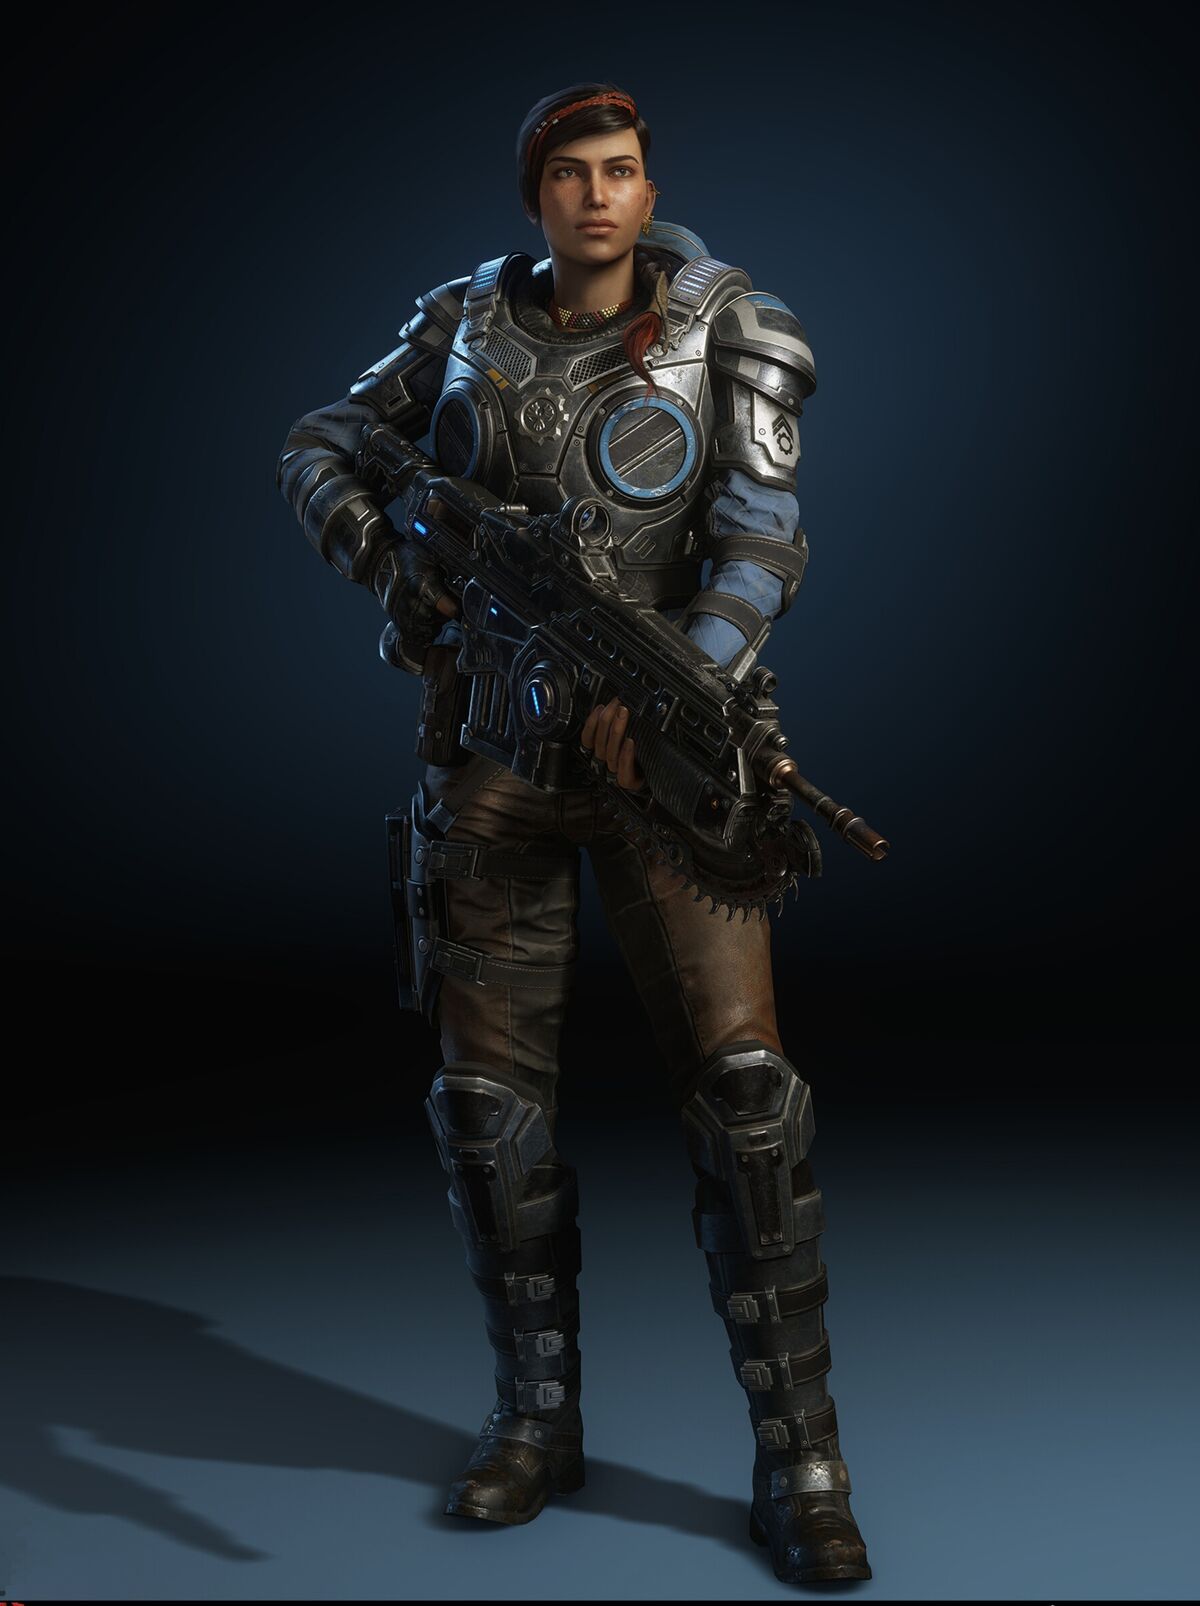 Gears 6: The Fate of Kait and the Other Protagonists